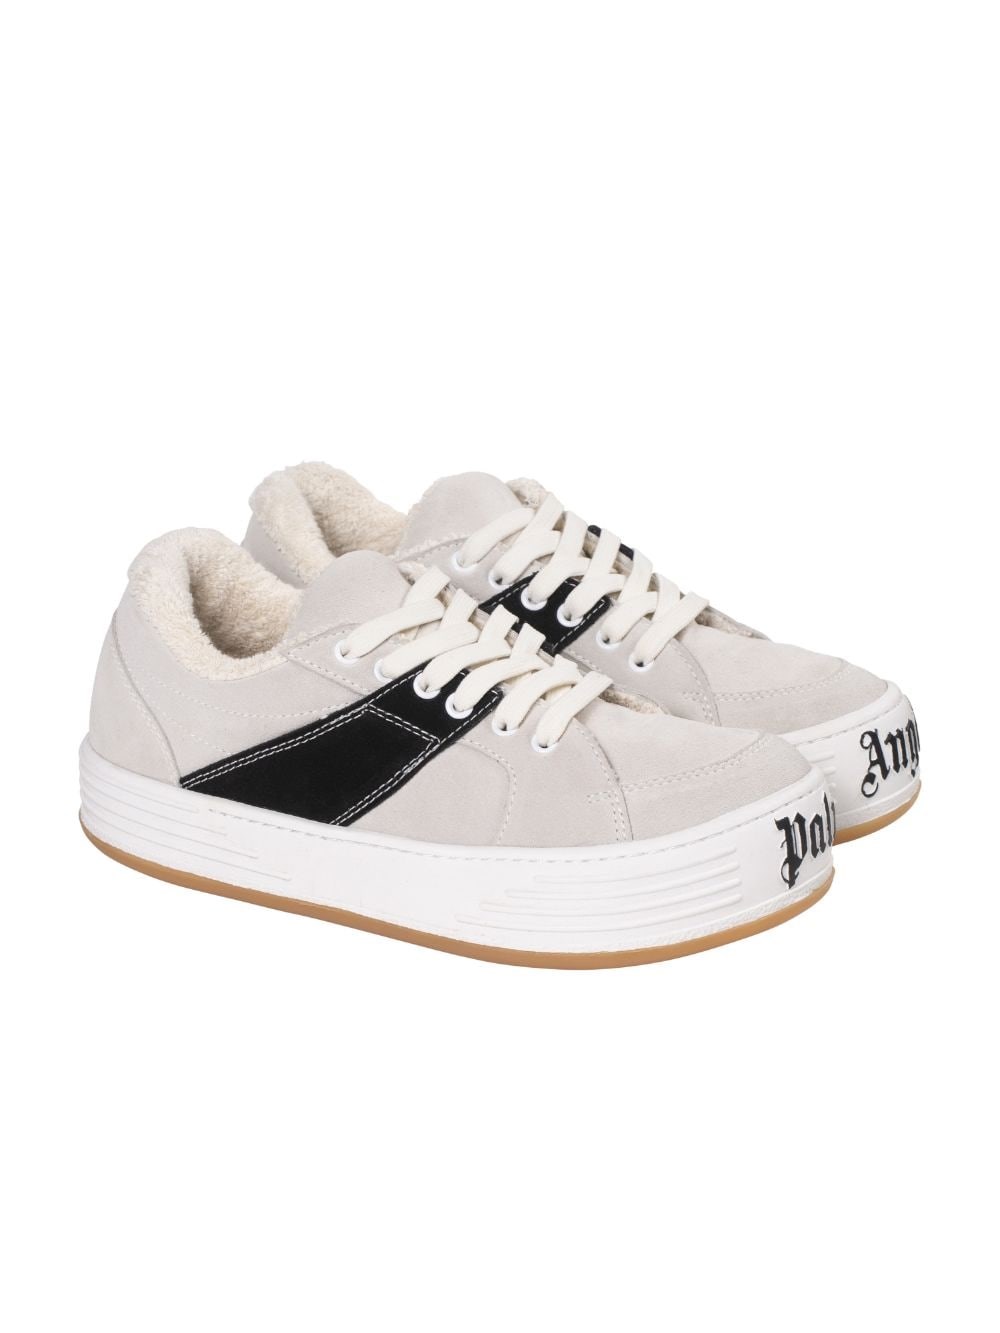 palm angels low top sneakers